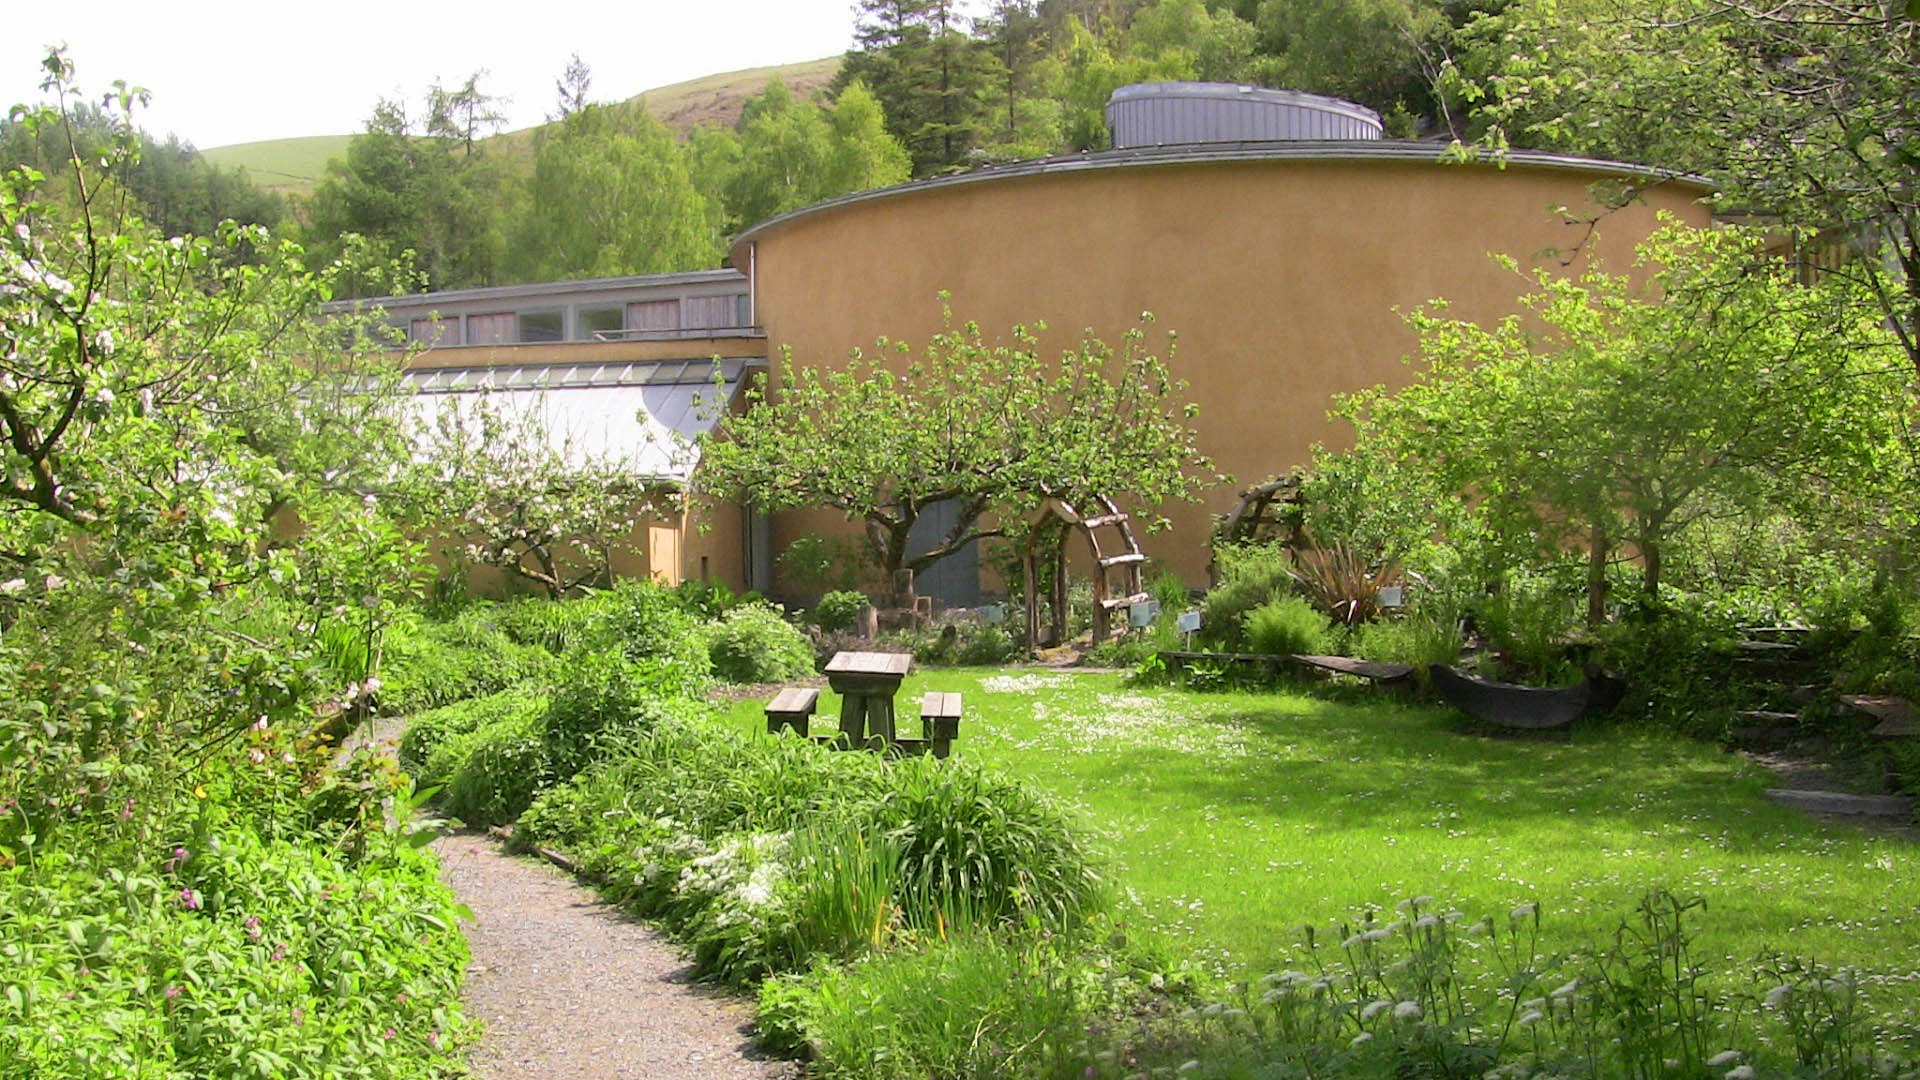 garden outside the Wales Institute of Sustainable Education